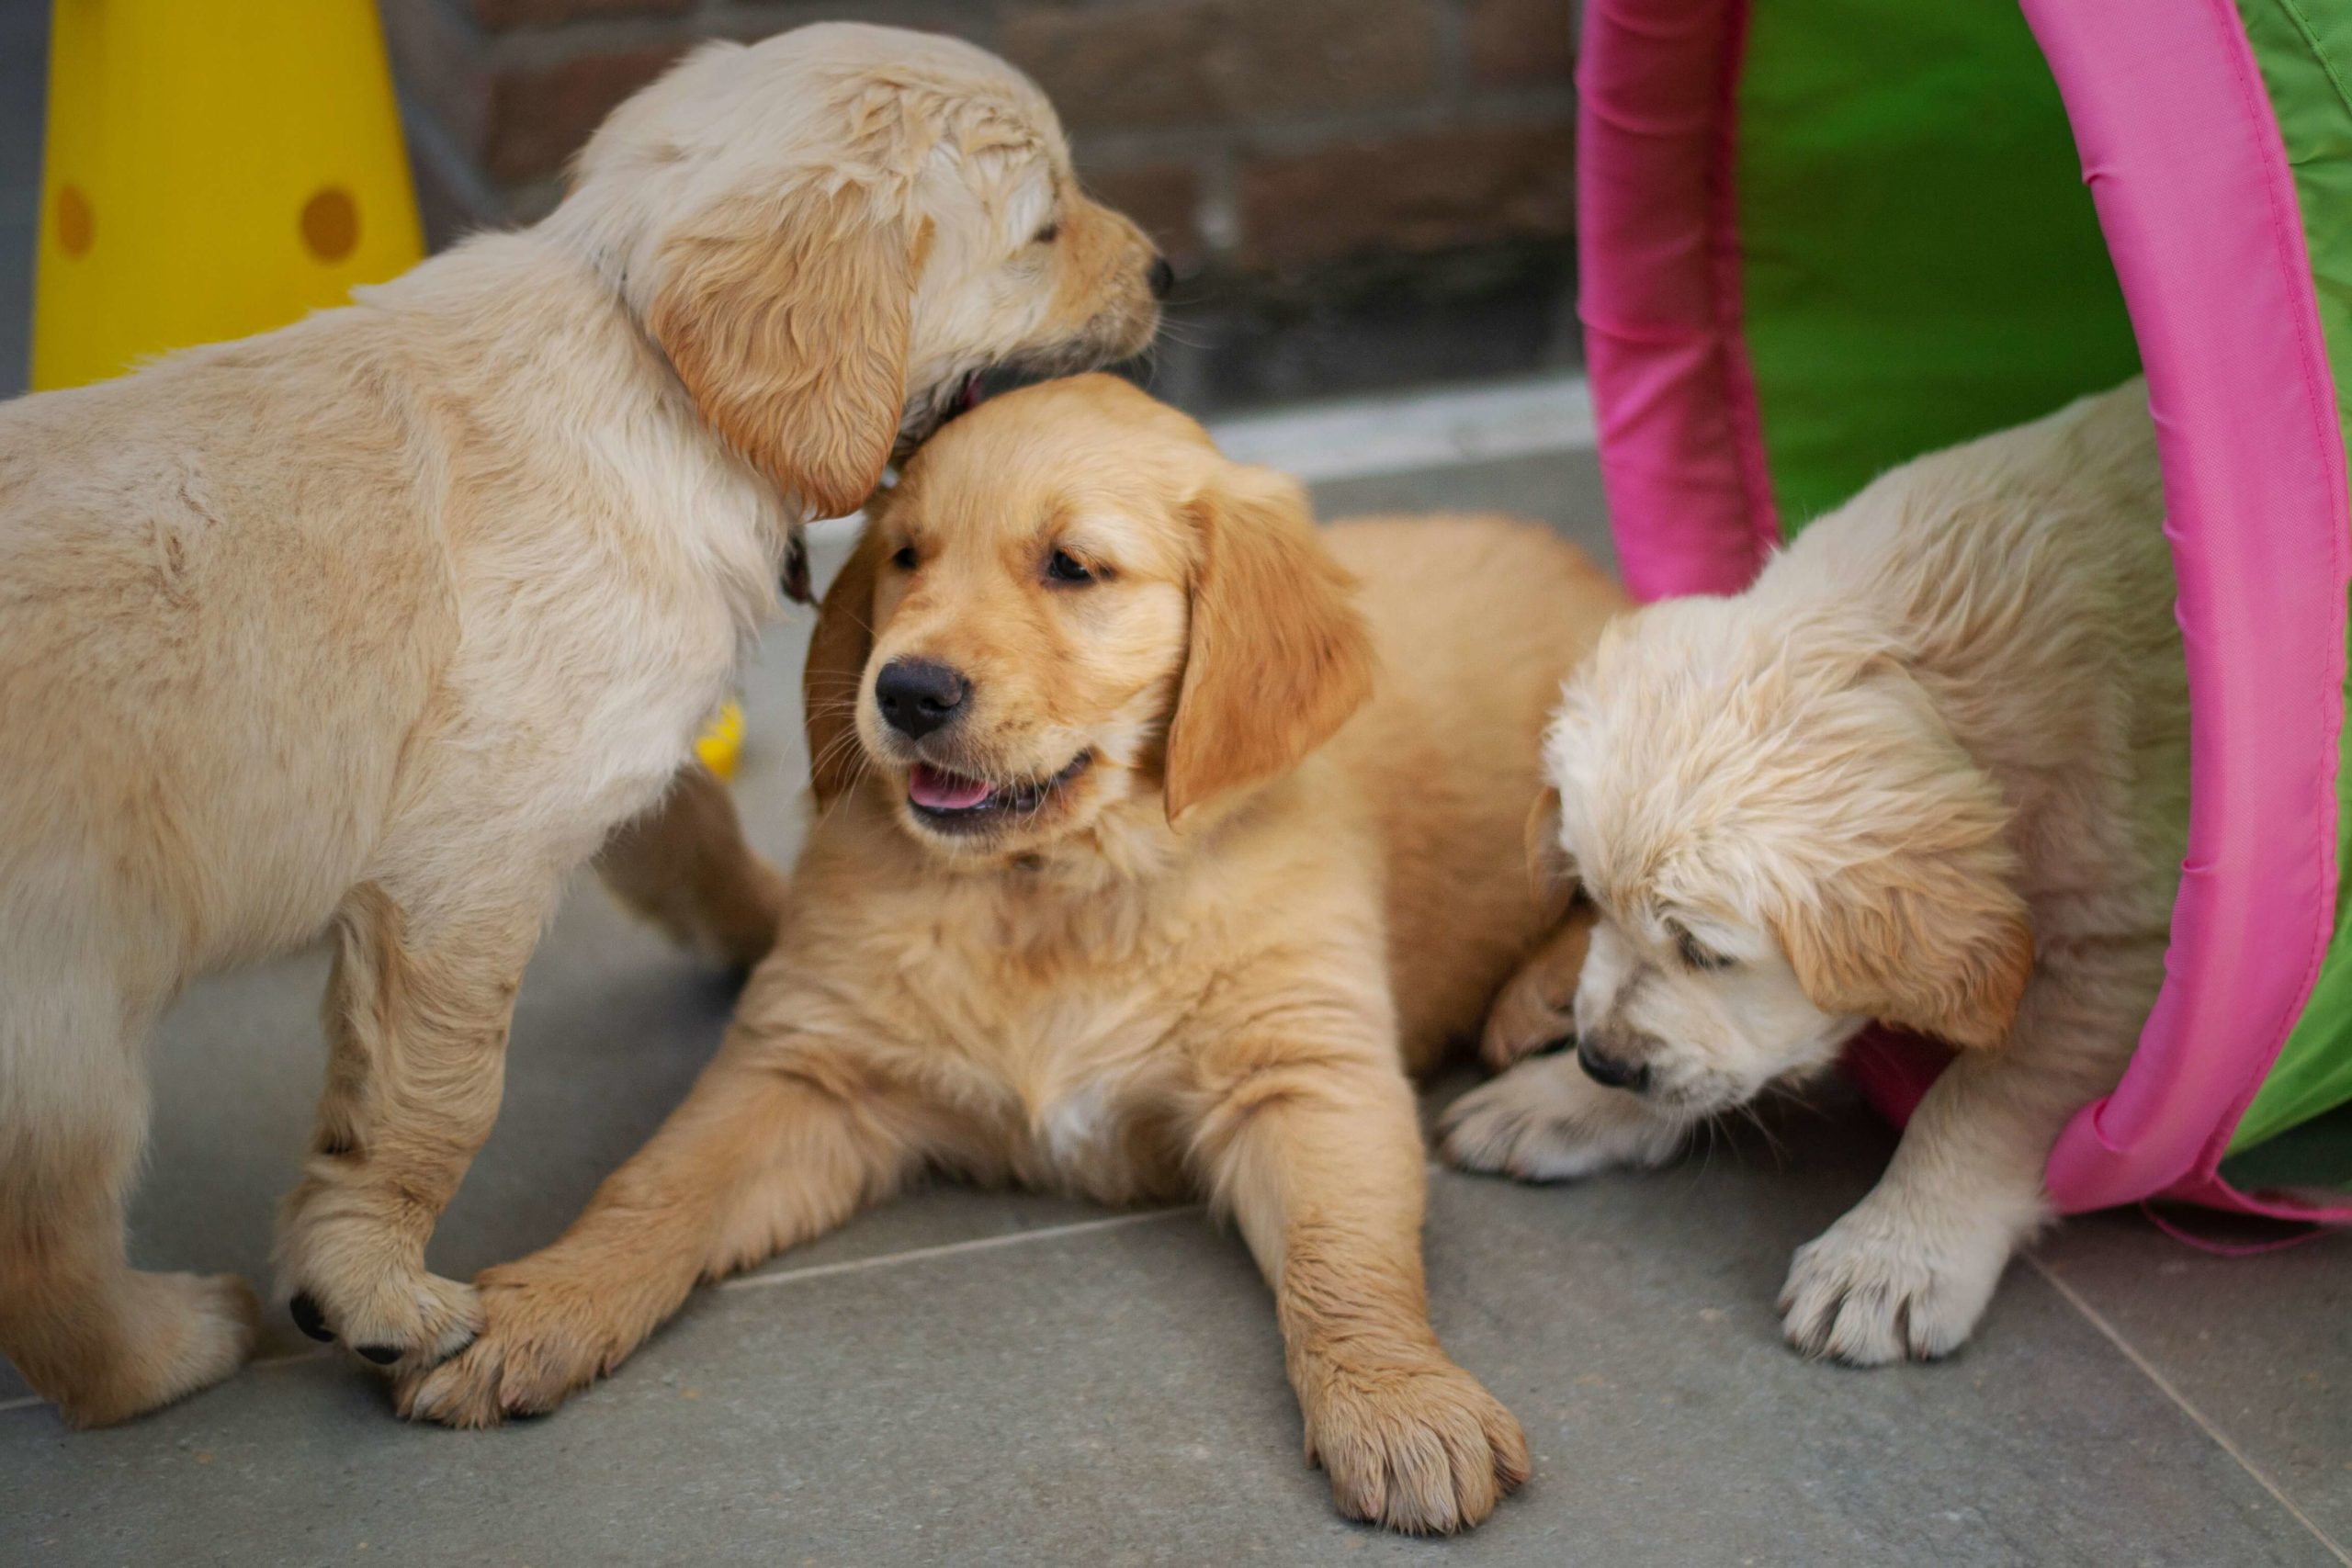 Picture of Golden Retrievers - how tall will they grow to be?